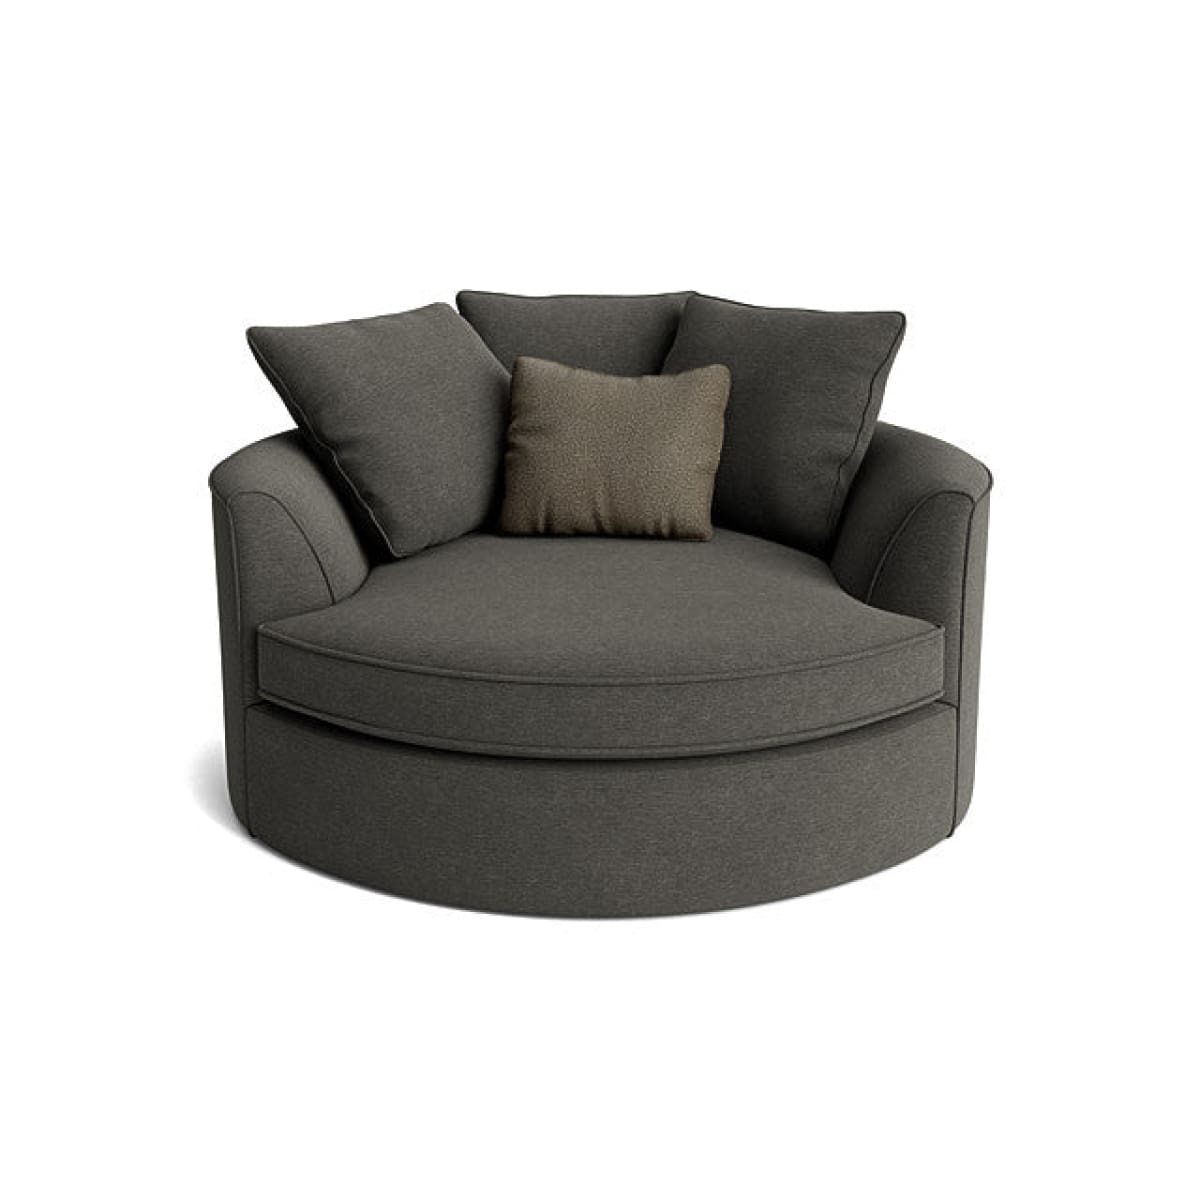 Nest Accent Chair - Saville Charcoal